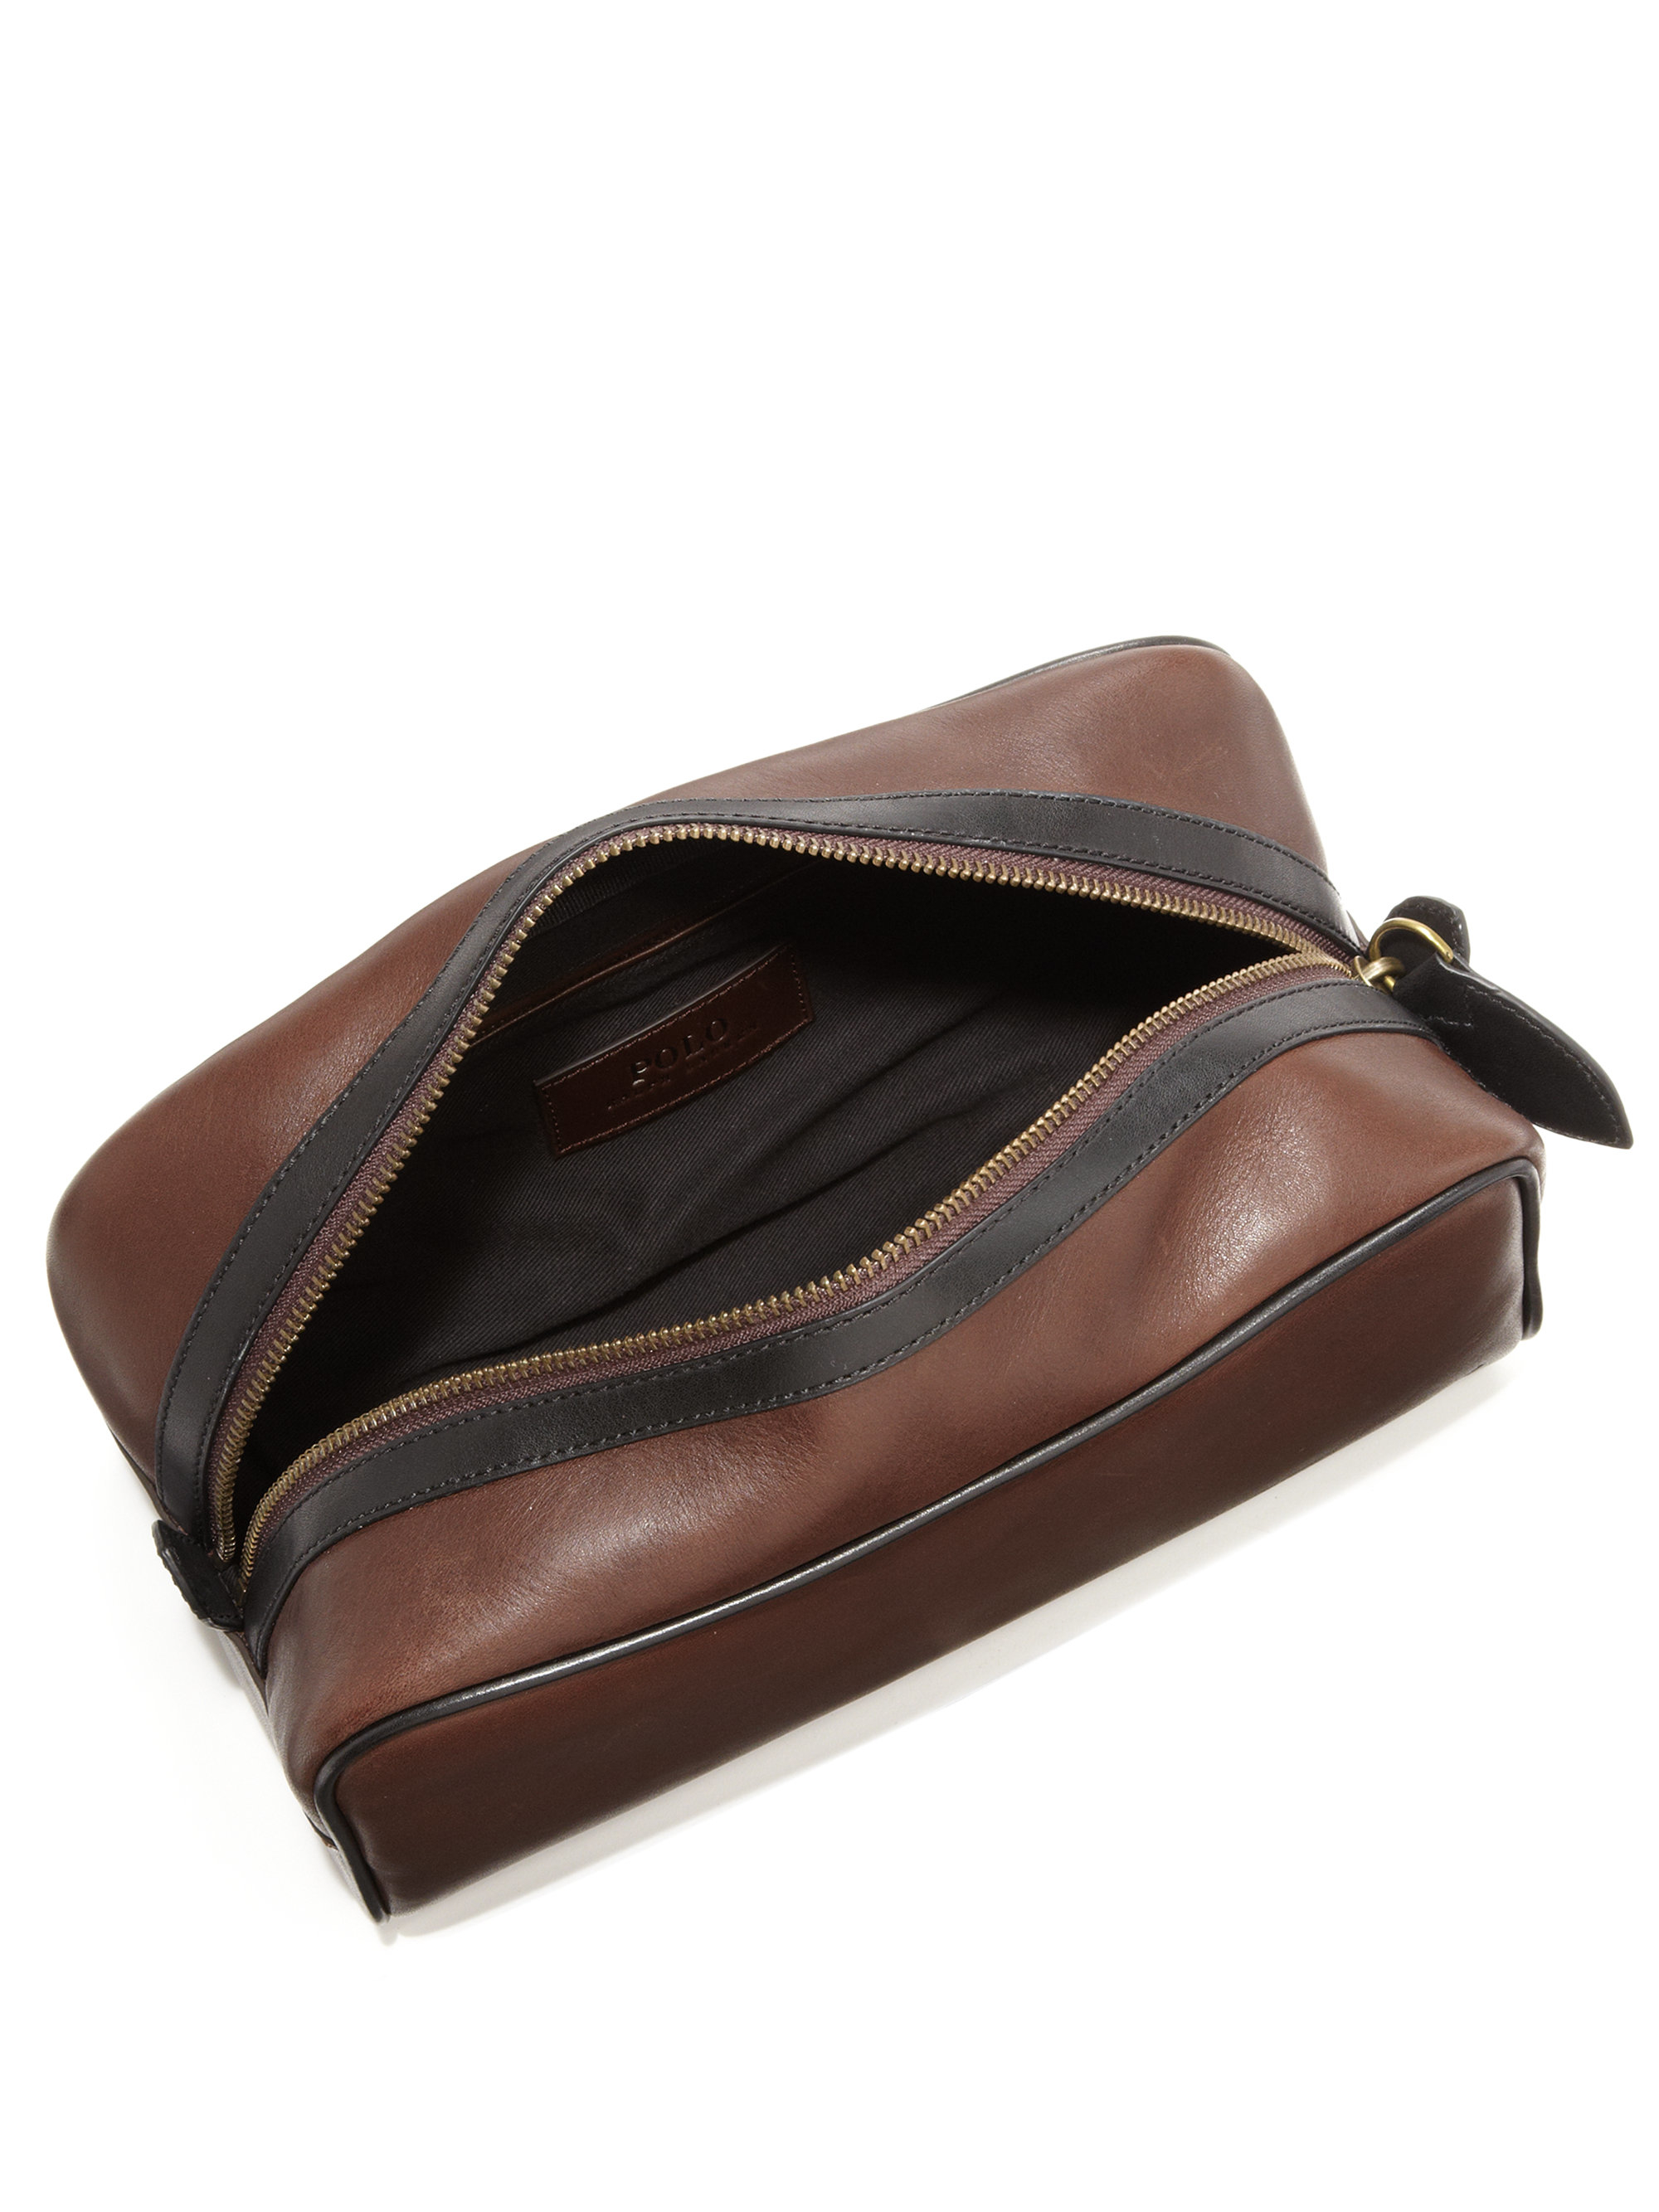 Polo ralph lauren Leather Toiletry Case in Brown for Men | Lyst